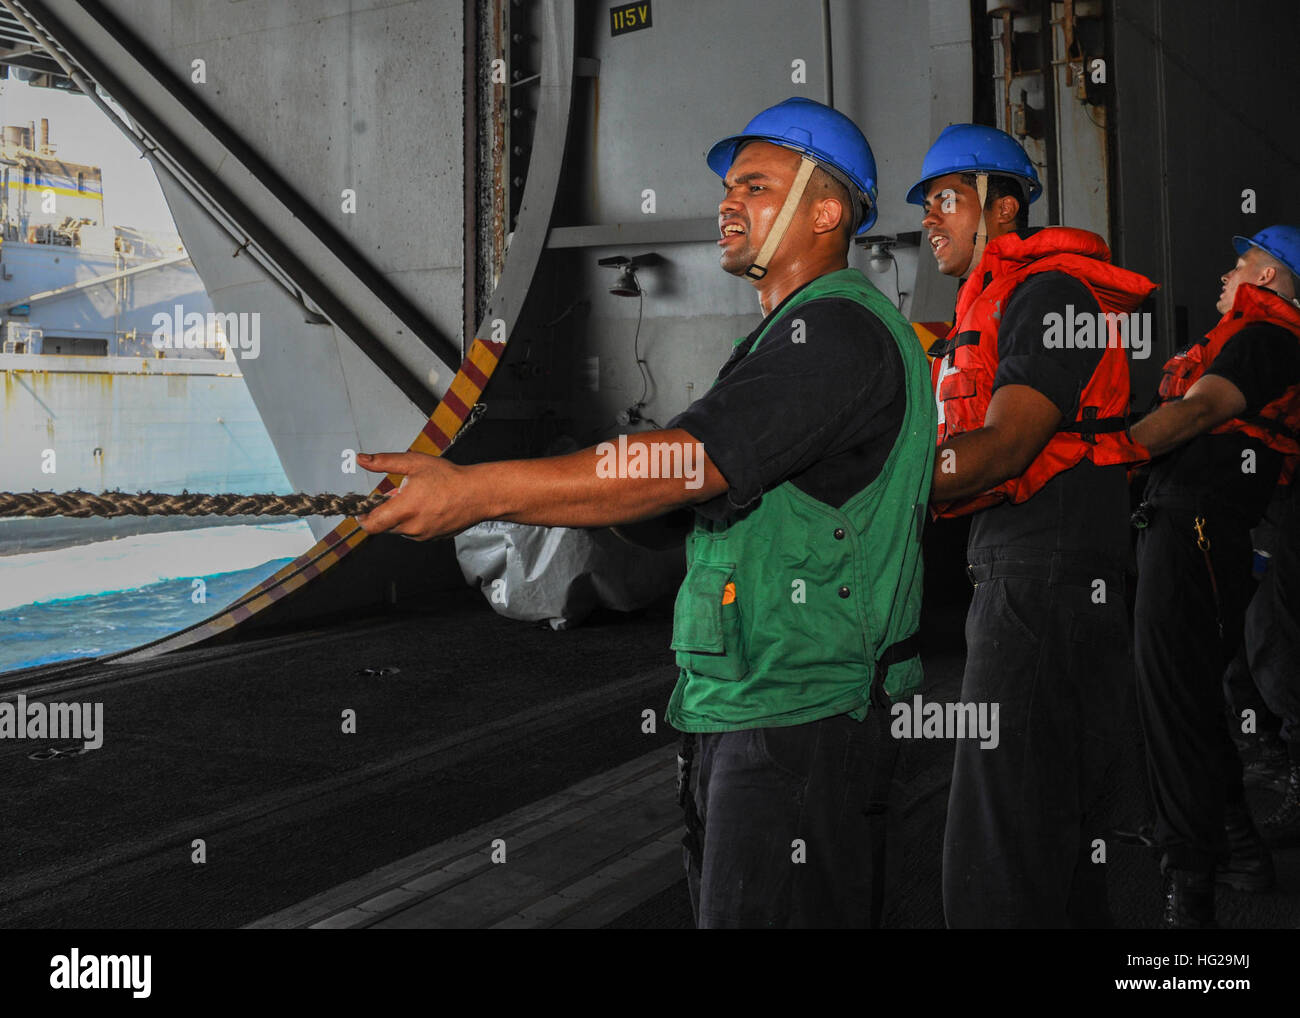 150909-N-CQ428-078  ARABIAN GULF (September 09, 2015) – Sailors handle line in the hangar bay aboard the aircraft carrier USS Theodore Roosevelt (CVN 71) during a replenishment-at-sea with the Military Sealift Command fast combat support ship USNS Arctic (T-AOE 8). Theodore Roosevelt is deployed in the U.S. 5th Fleet area of operations supporting Operation Inherent Resolve, strike operations in Iraq and Syria as directed, maritime security operations and theater security cooperation efforts in the region. (U.S. Navy photo by Mass Communication Specialist 3rd Class Jennifer Case/Released) USS T Stock Photo